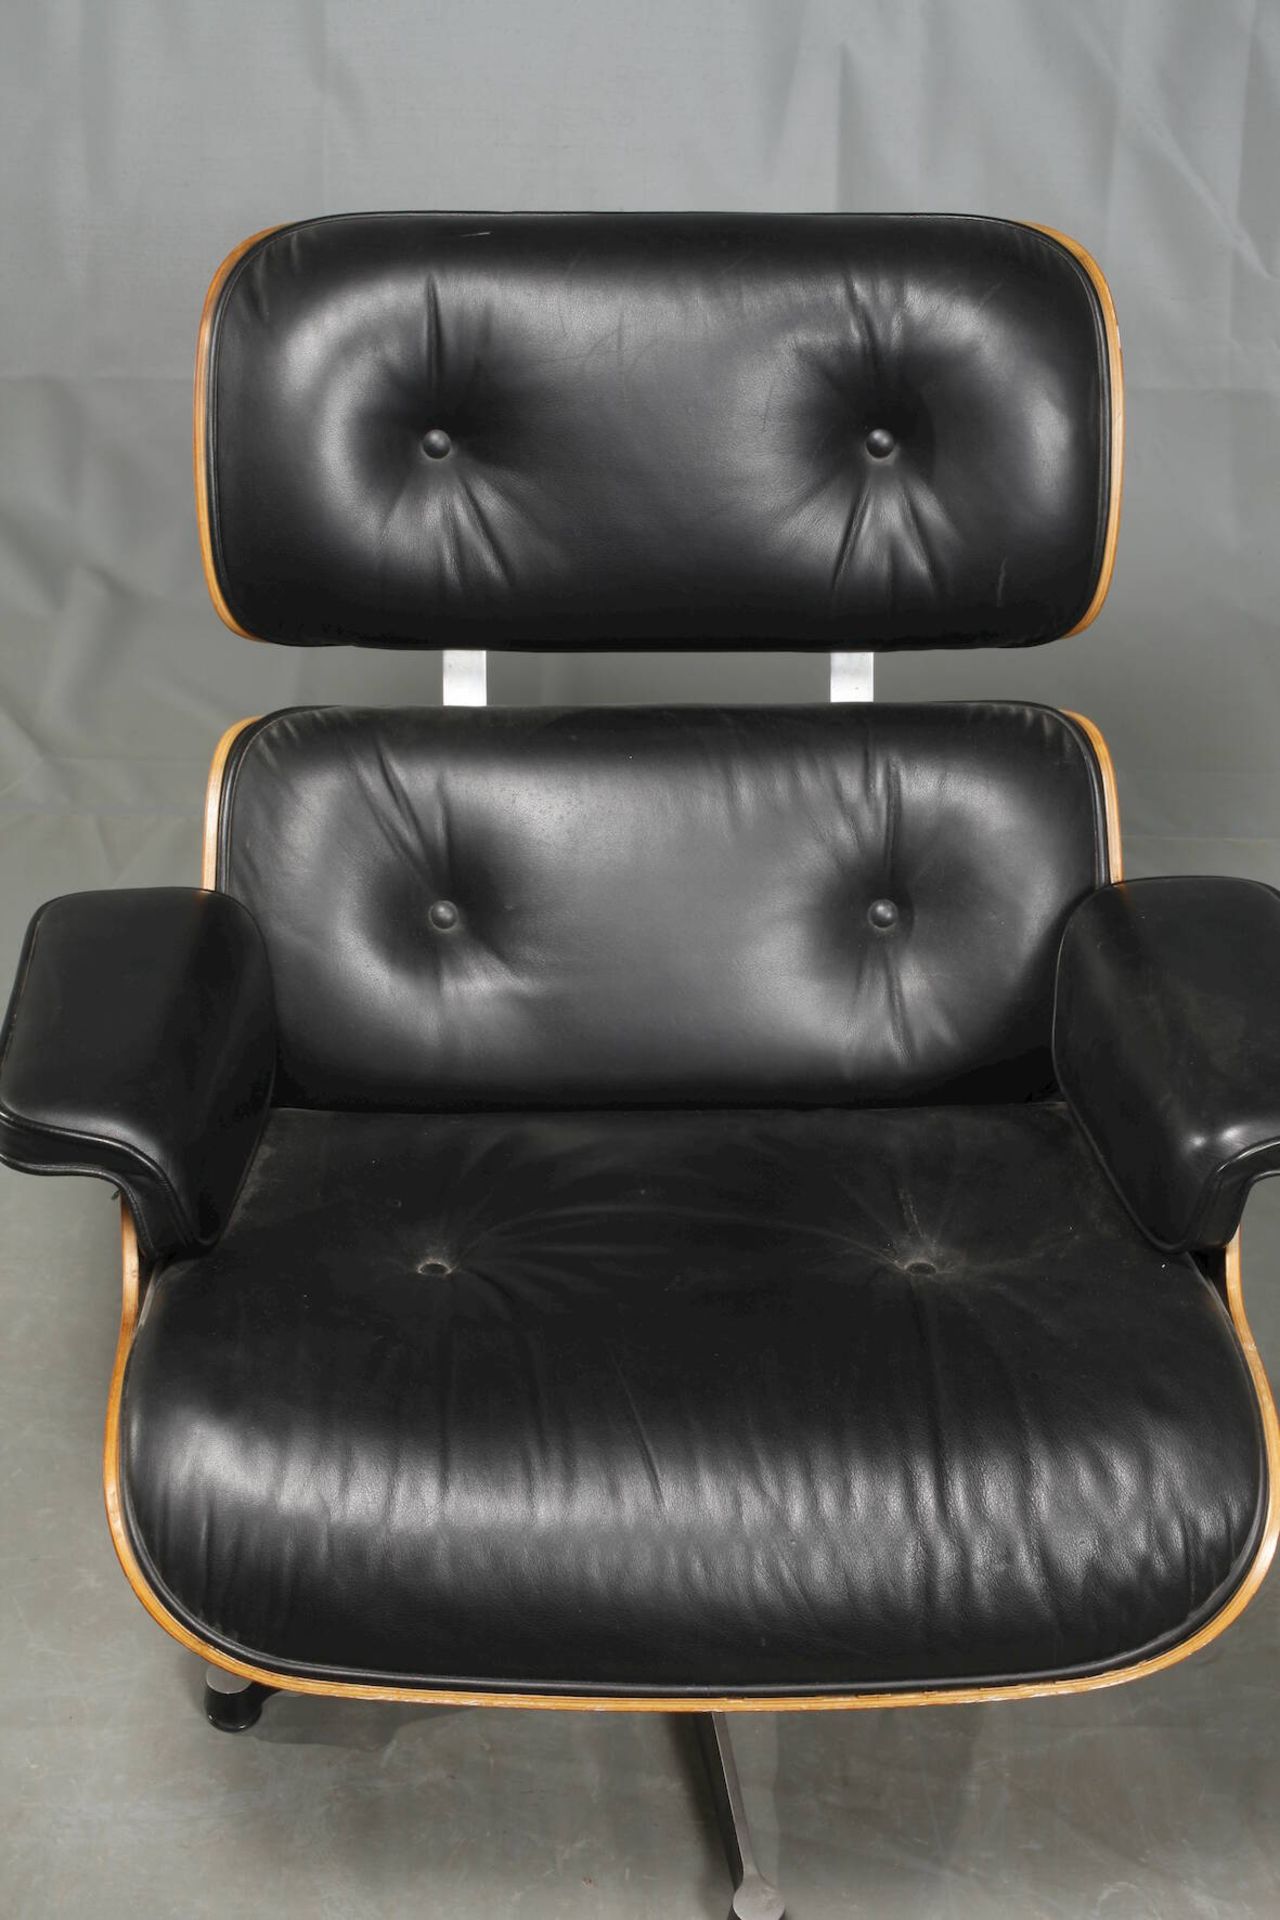 Eames Lounge Chair - Image 2 of 4